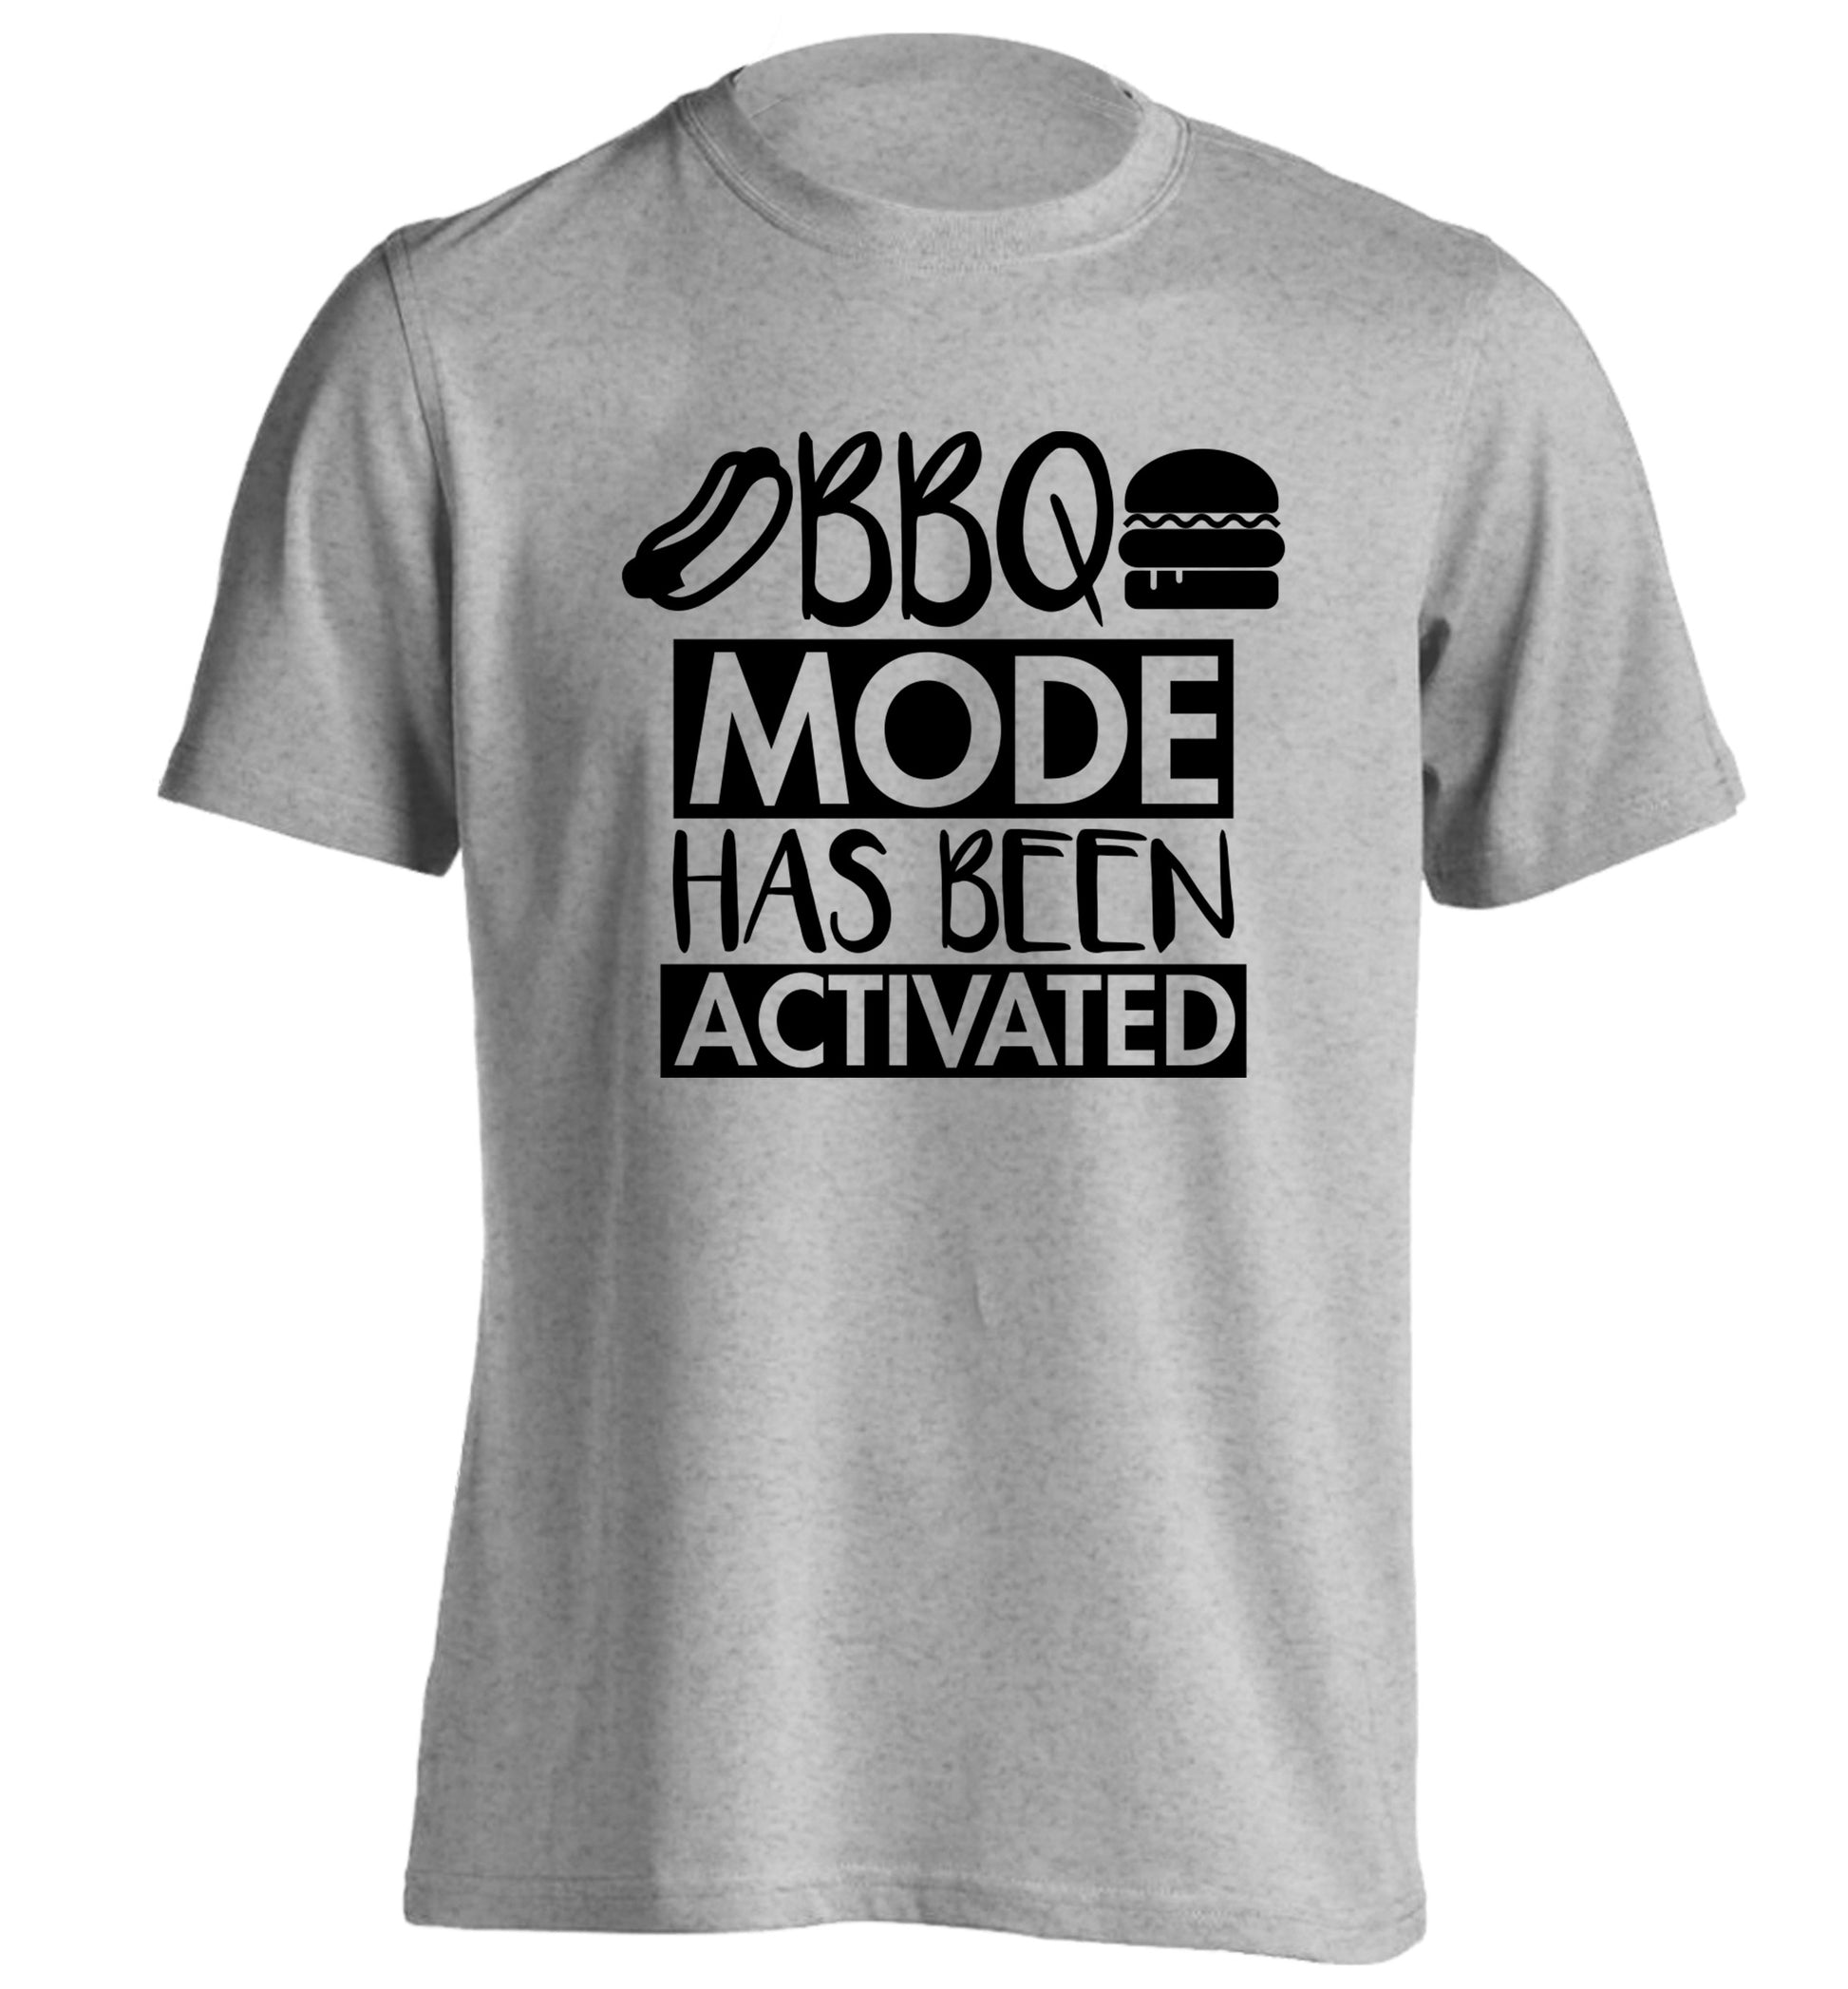 Bbq mode has been activated adults unisex grey Tshirt 2XL